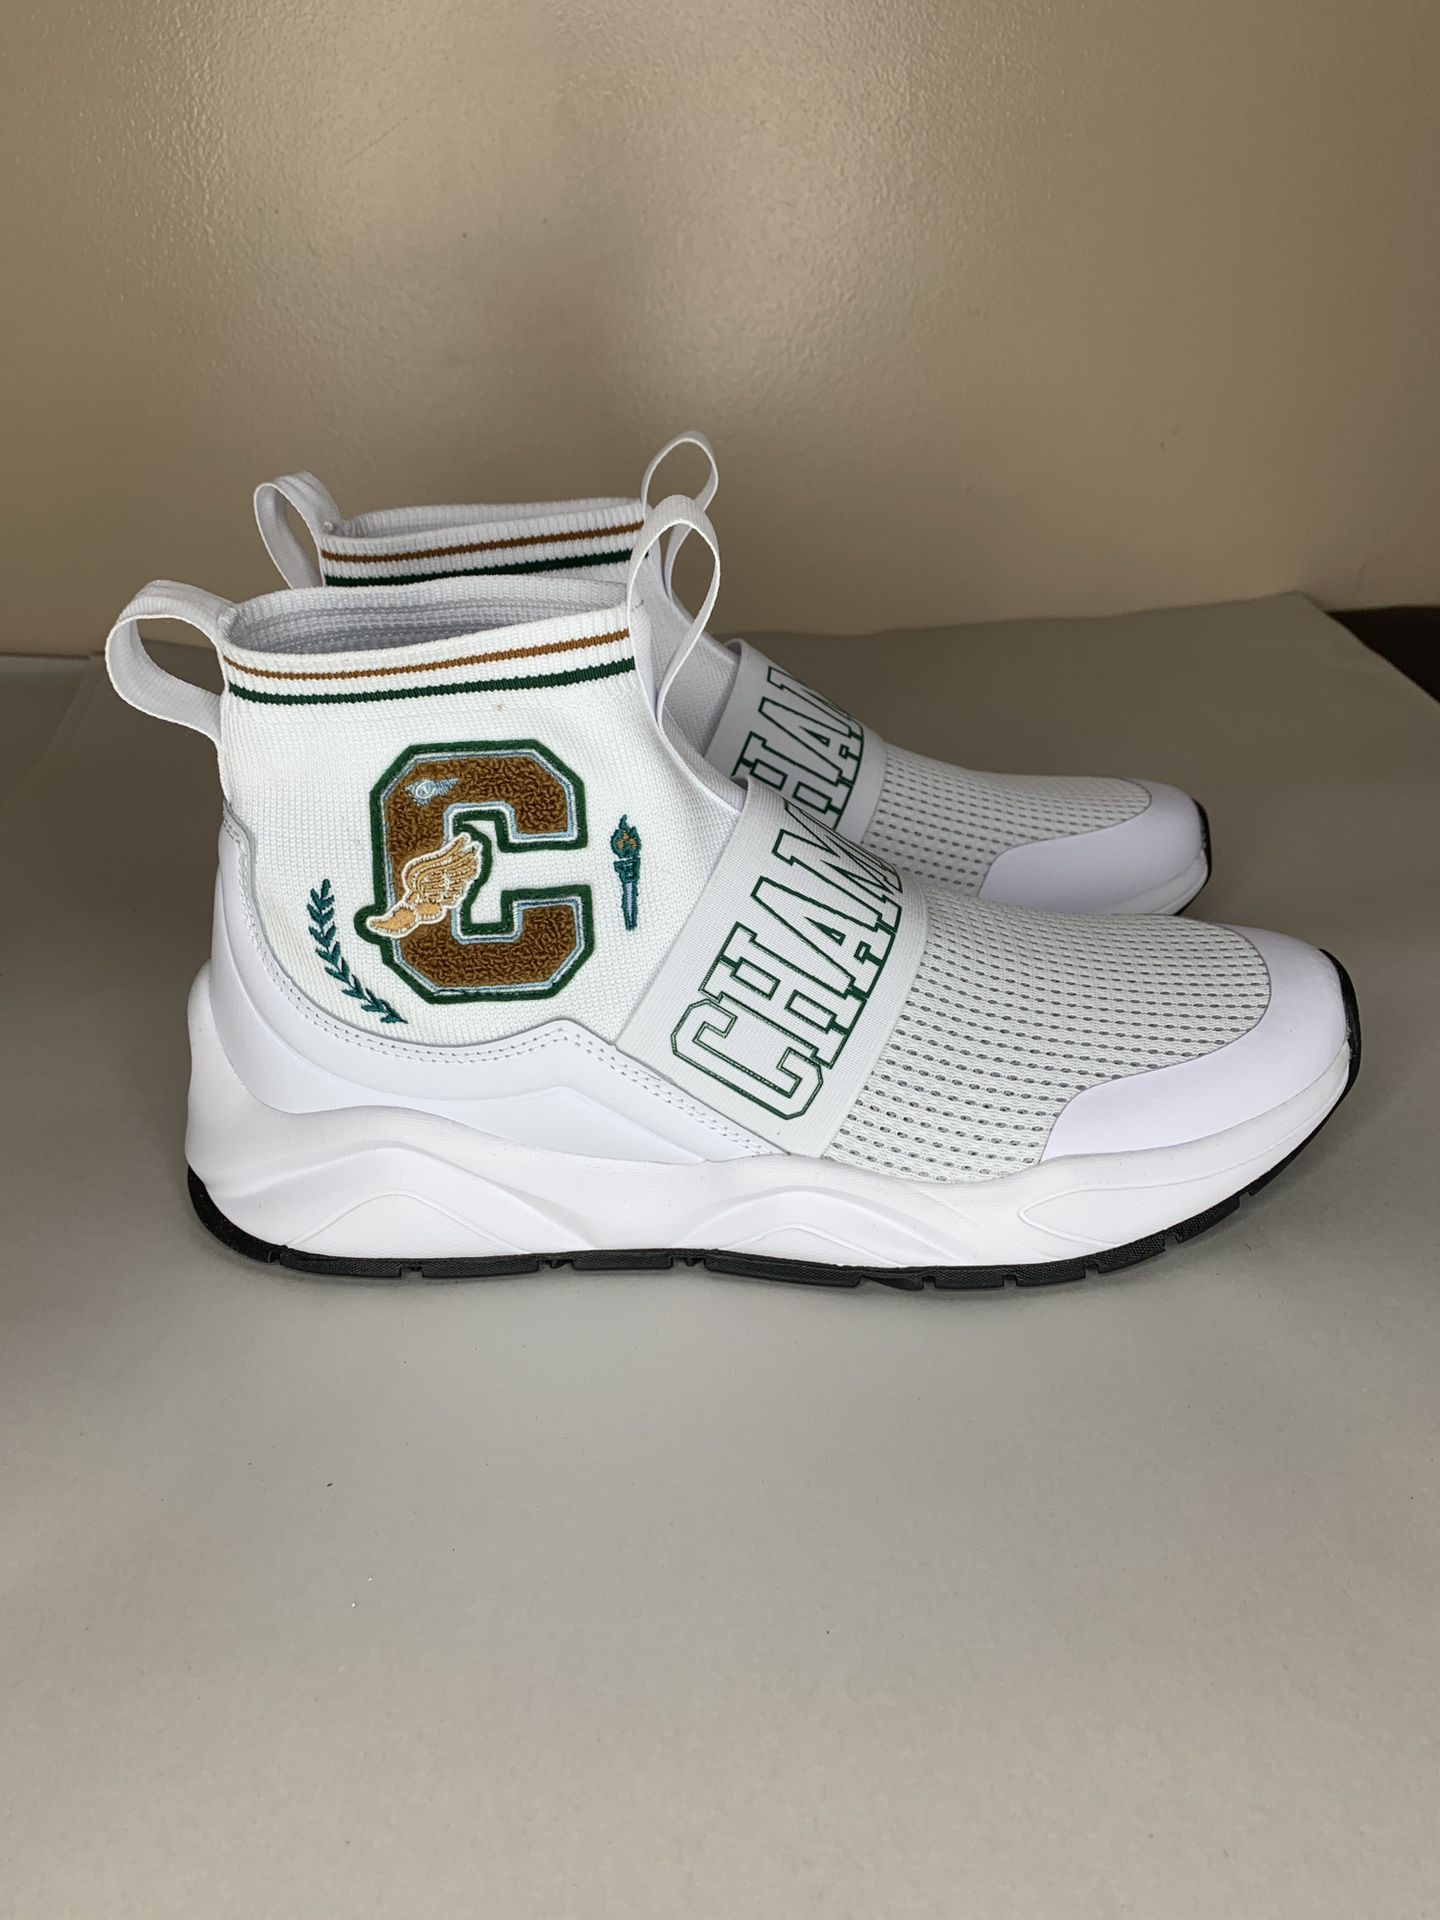 Champion Rally Pro Collegiate Men's Sneakers White Size 10 New without original box.